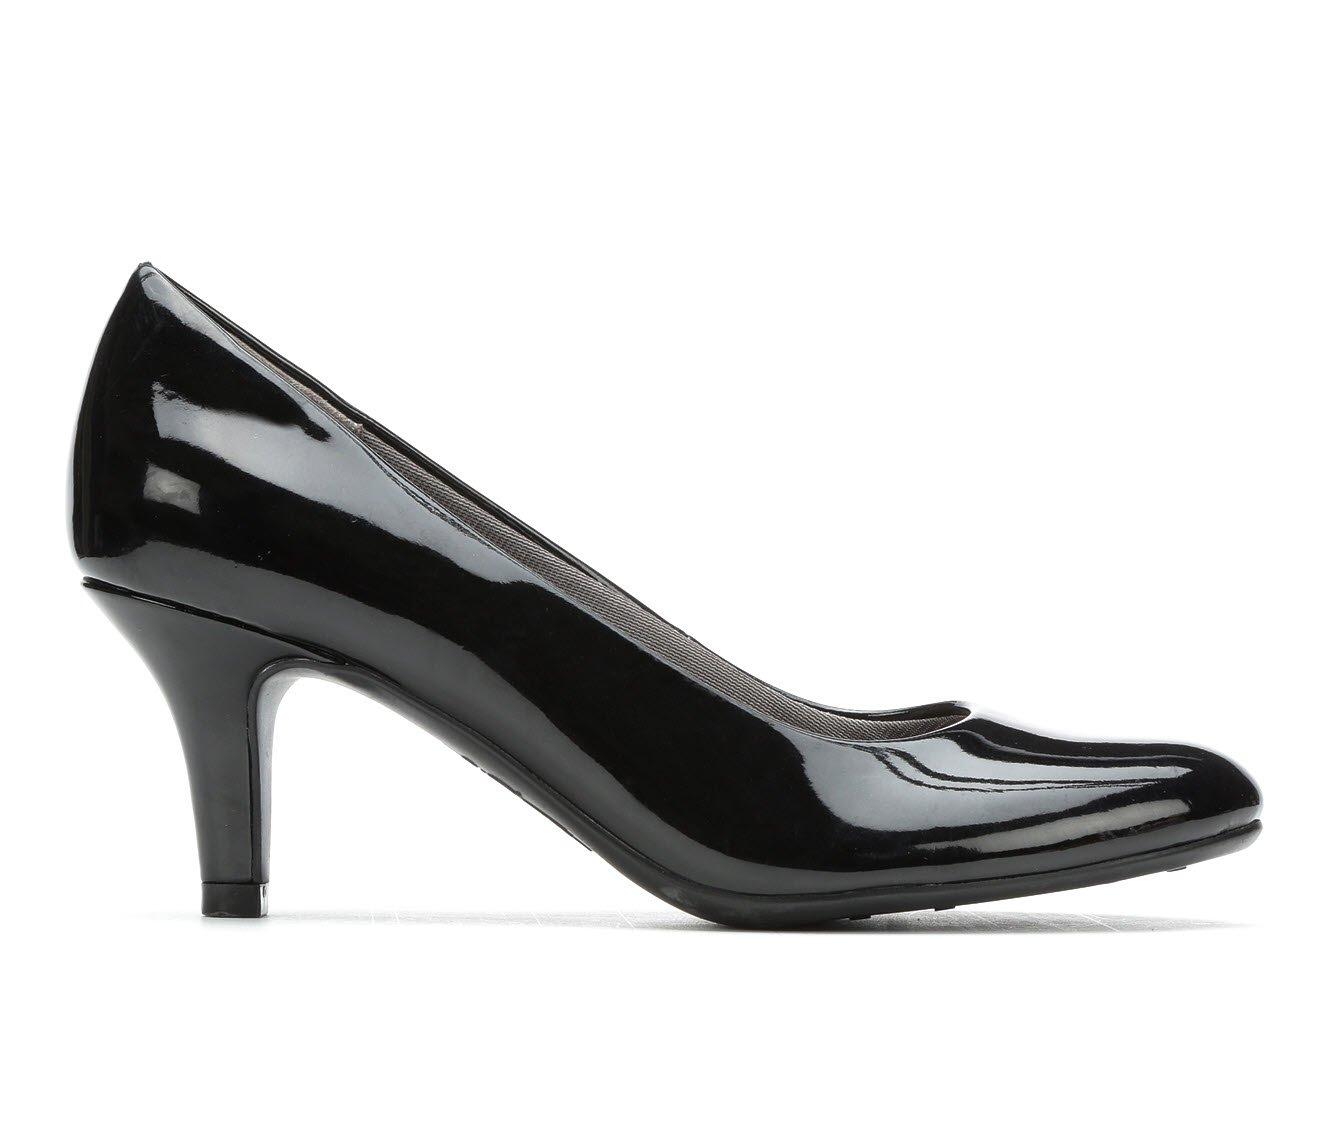 Women's pumps online: pumps with high and low heels